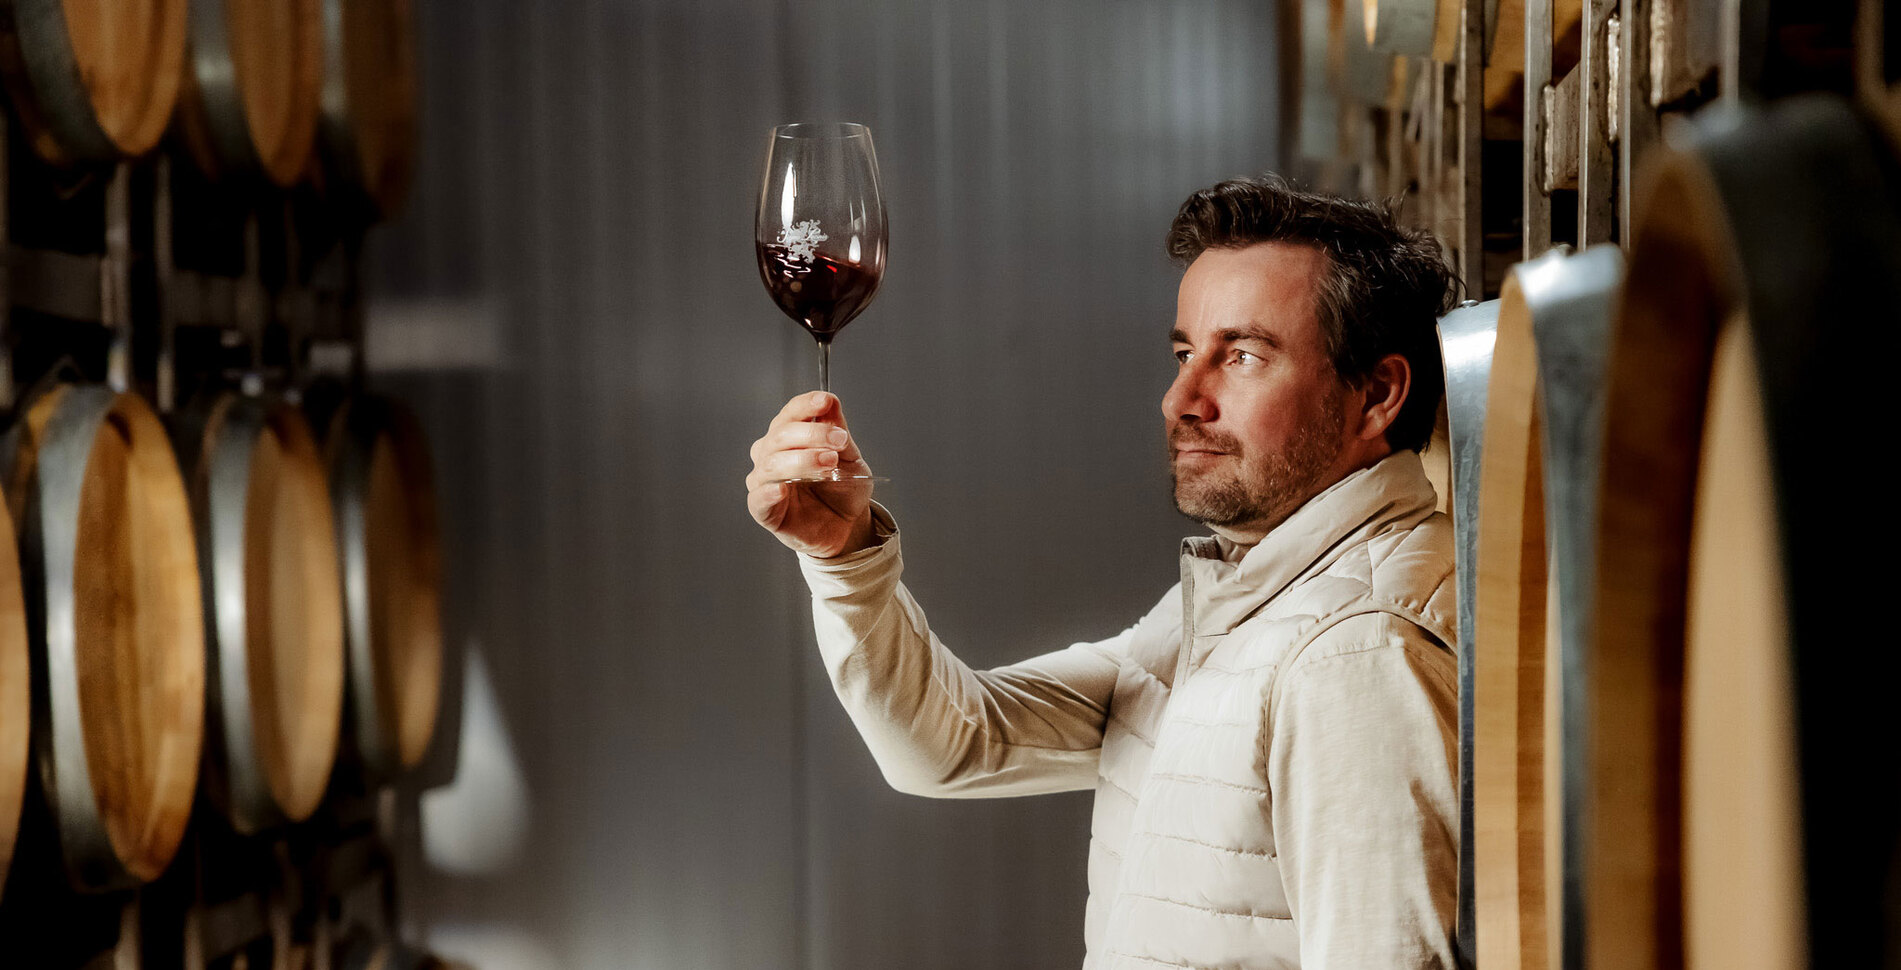 Dealcoholized Wine Is Better Than Ever: 2 Experts Weigh In on Why